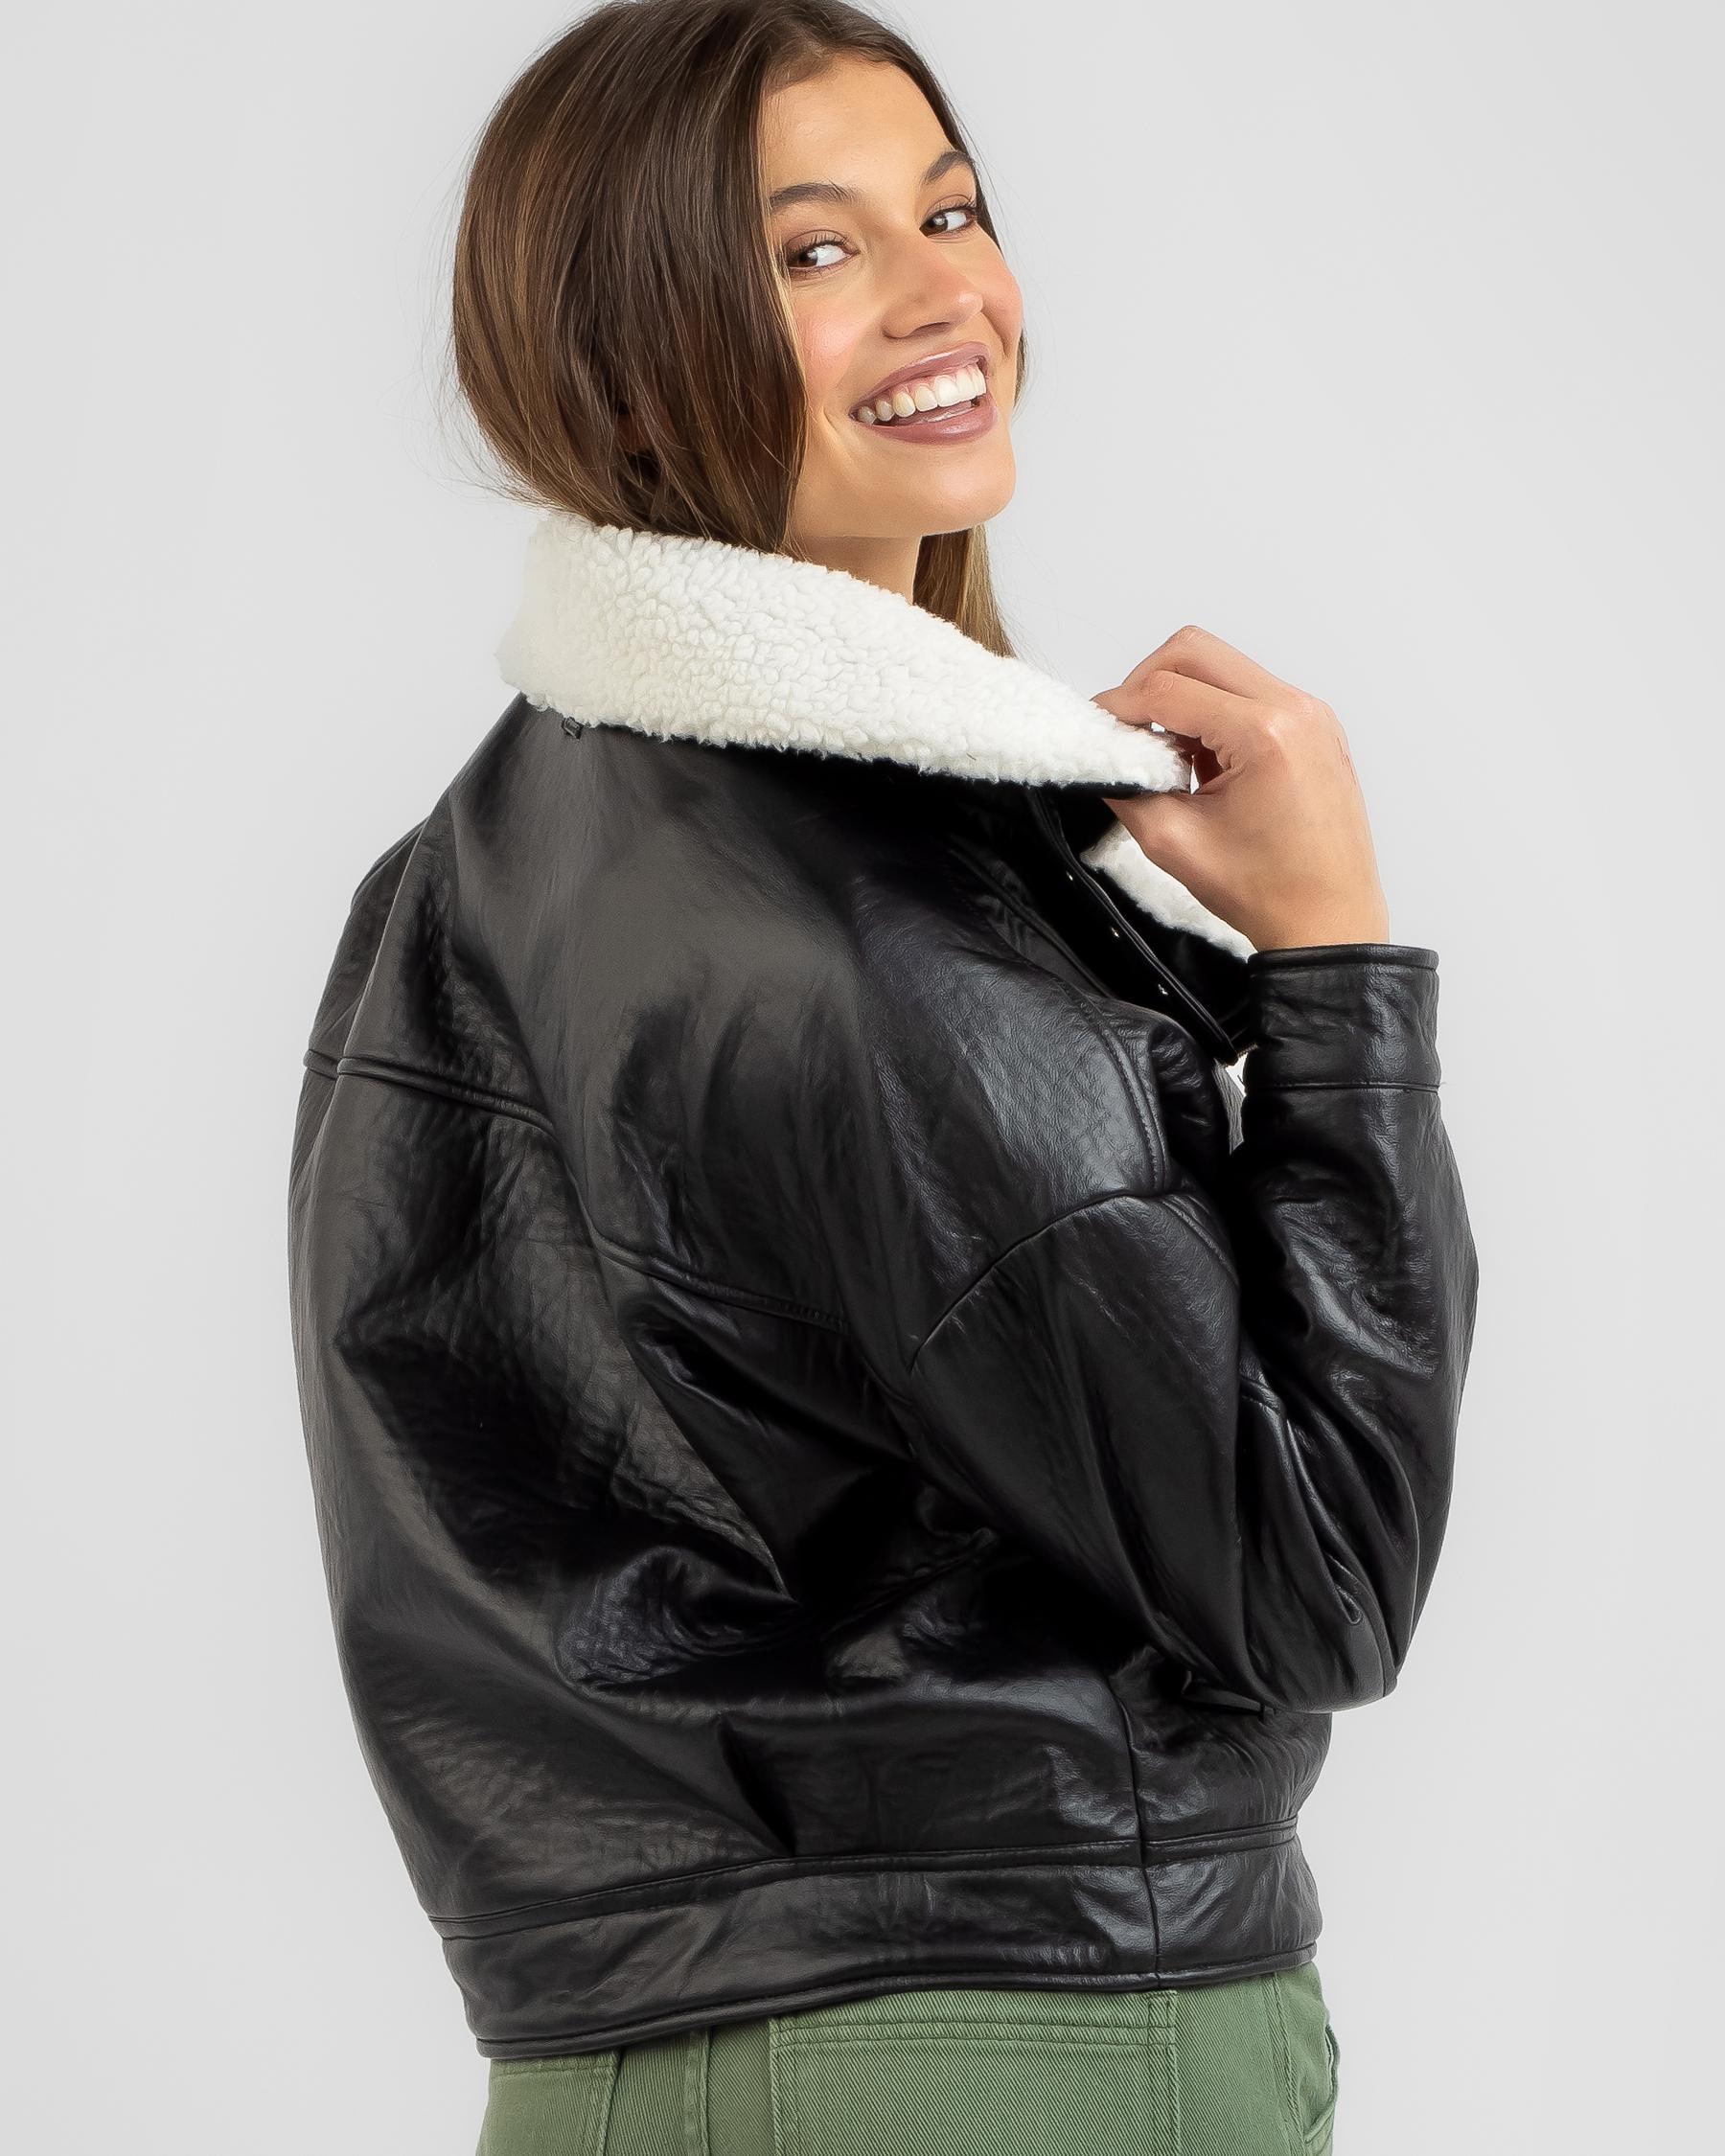 Shop Ava And Ever Frenchy Jacket In Black/cream - Fast Shipping & Easy ...